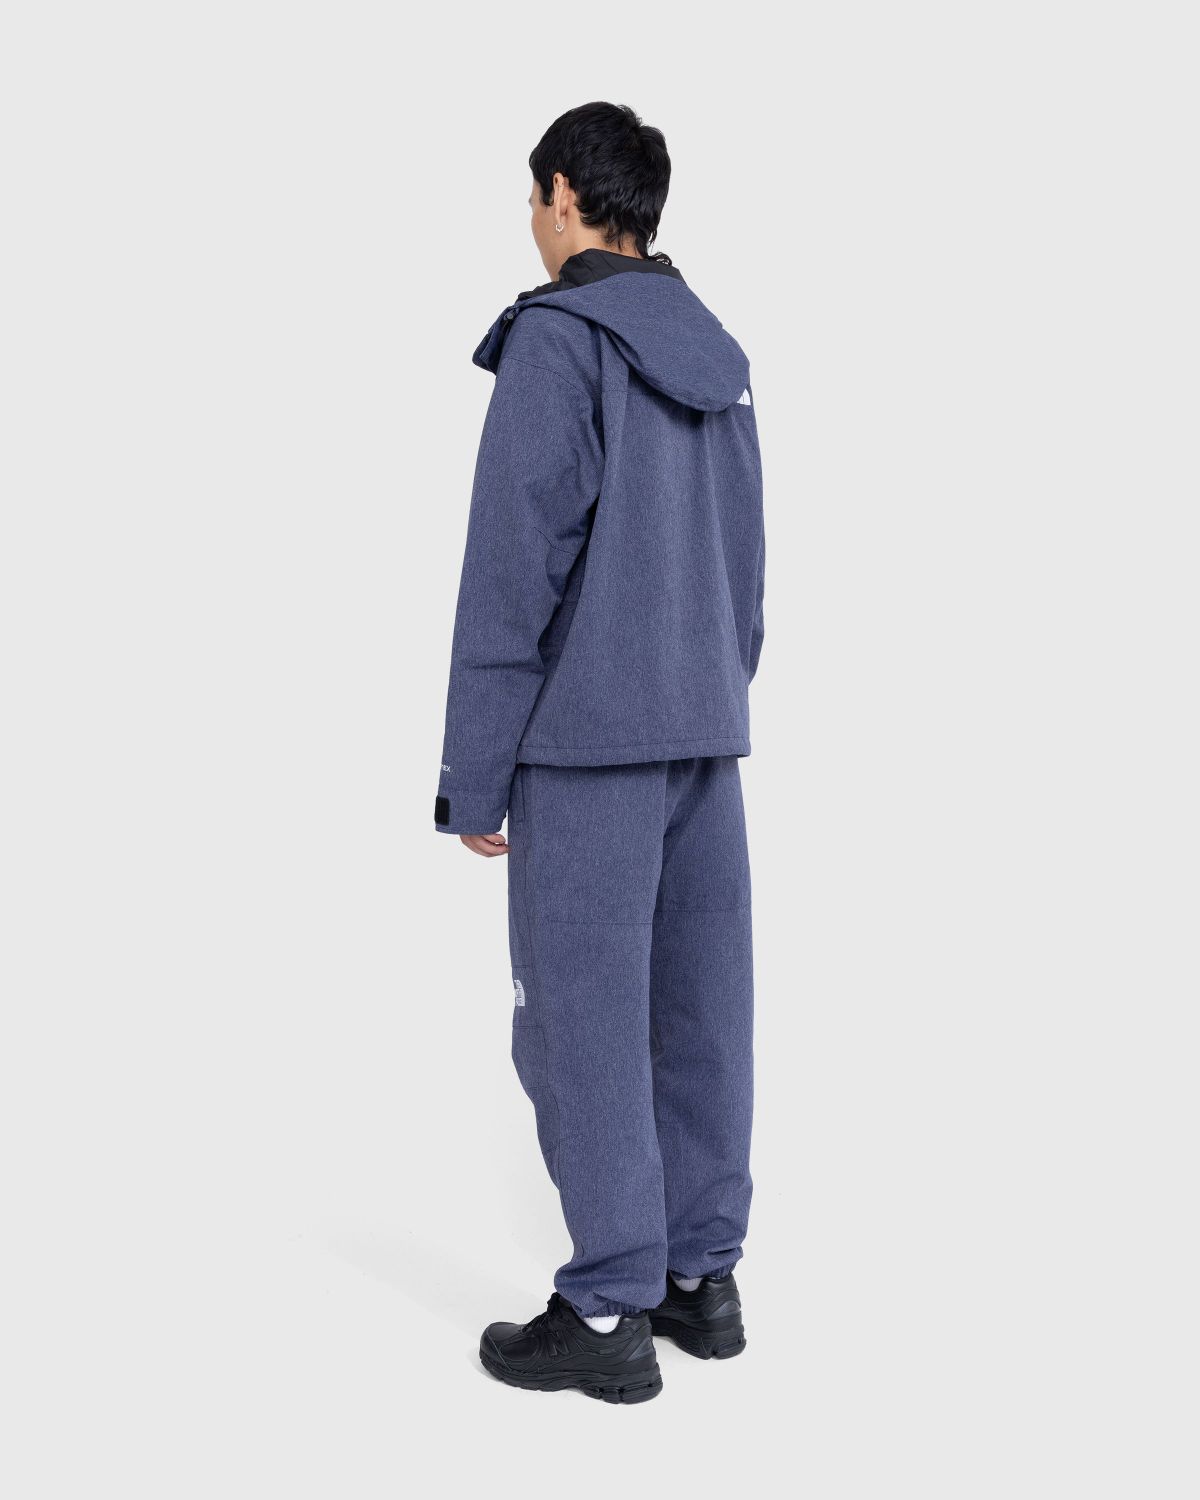 The North Face – GORE-TEX Mountain Pant Blue | Highsnobiety Shop